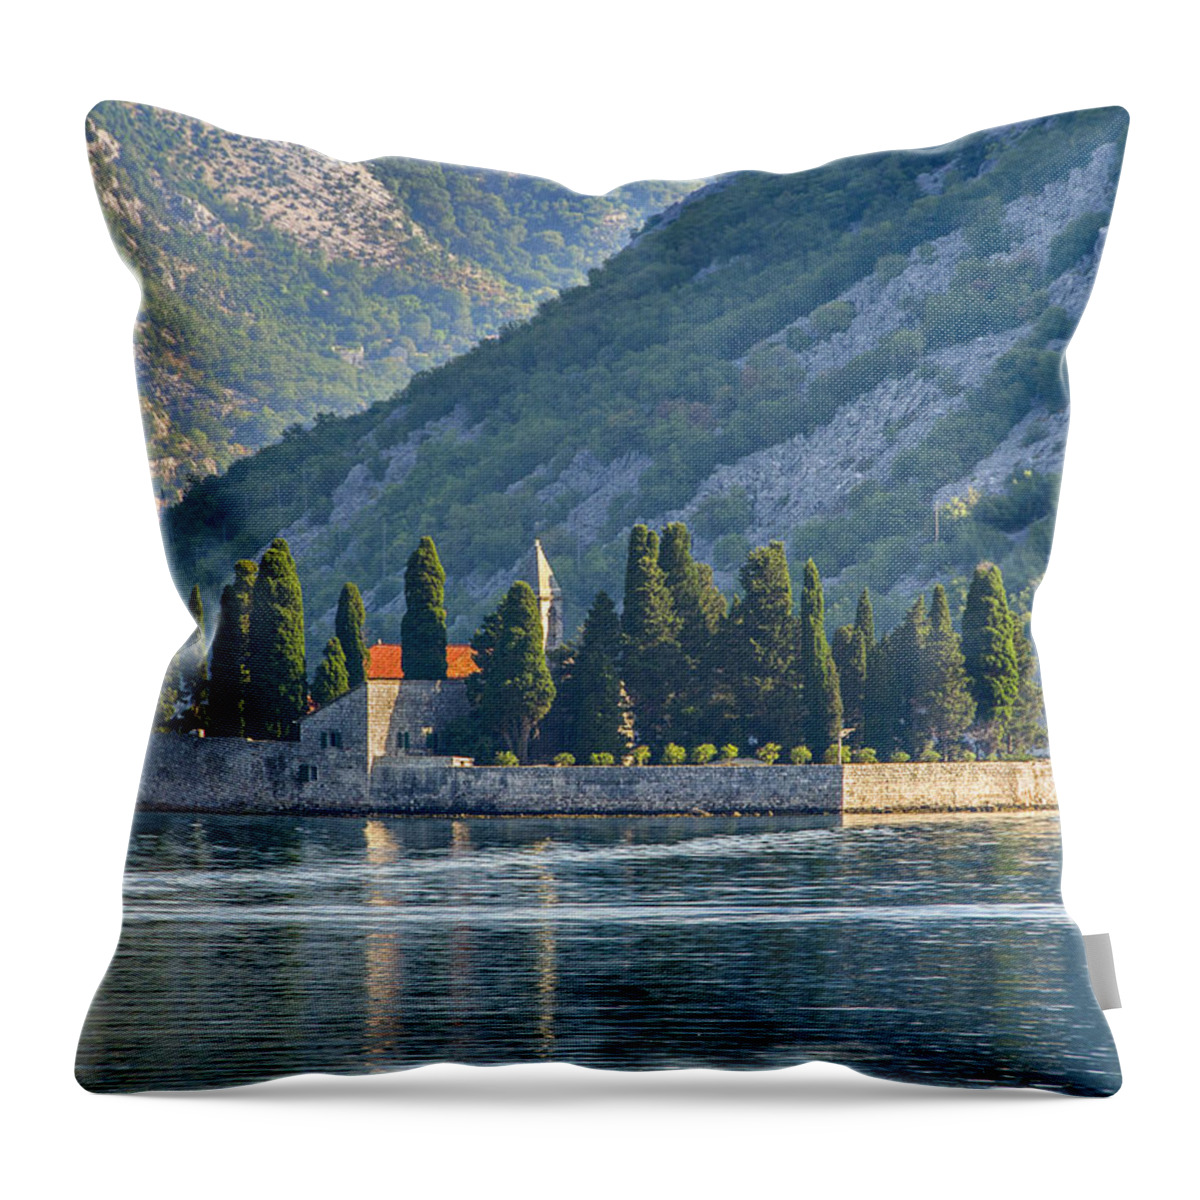 Dalmatian Coast Throw Pillow featuring the photograph Kotor Bay St. George Island by Alan Toepfer